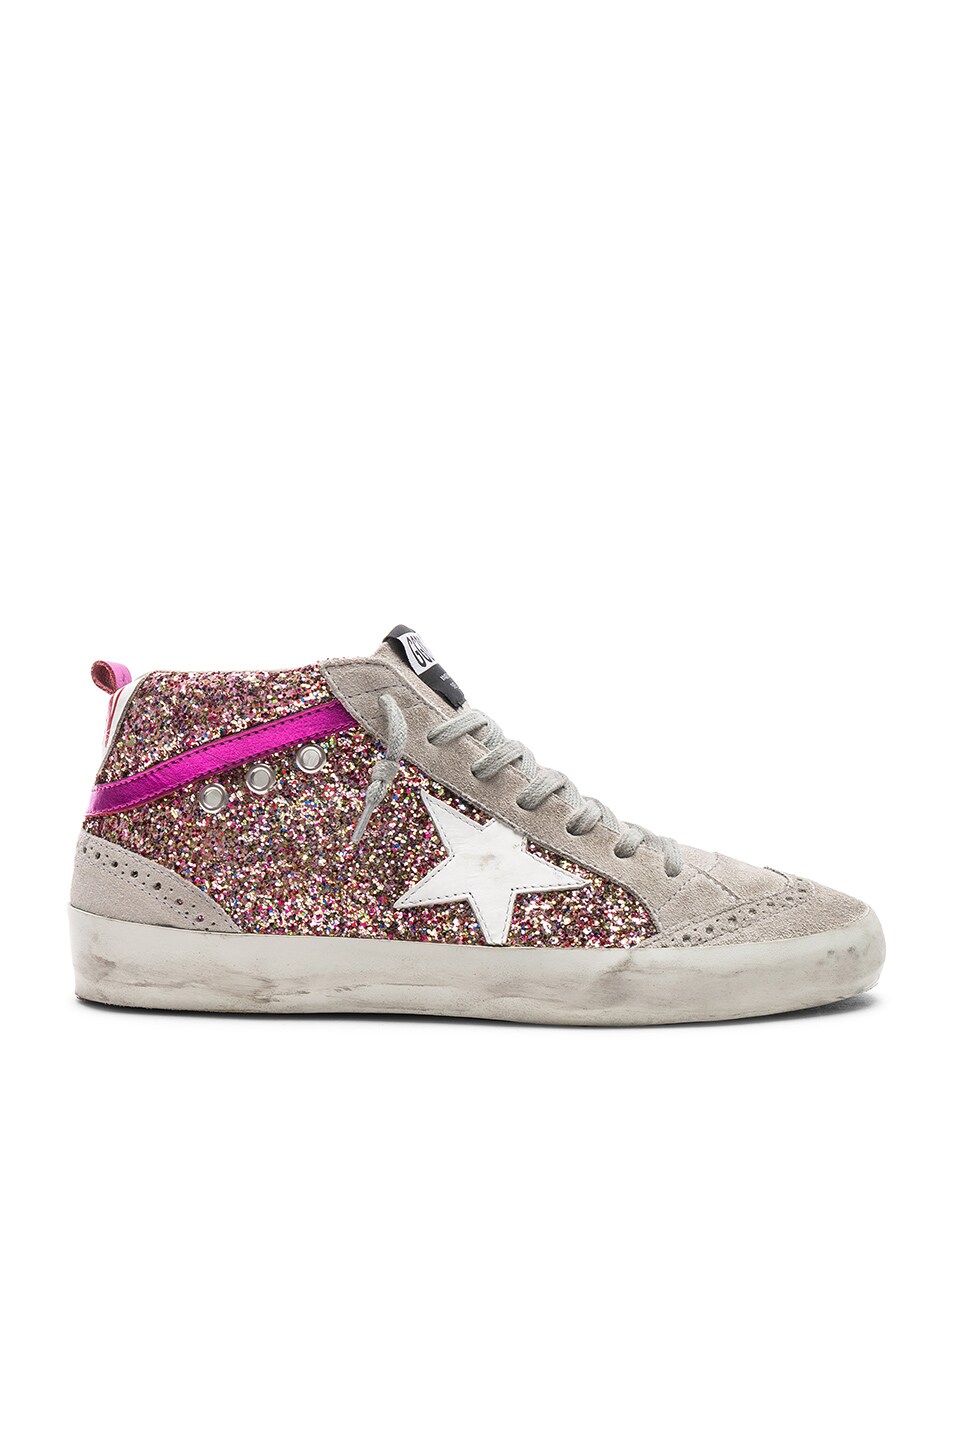 Image 1 of Golden Goose Glitter Mid Star Sneakers in Multicolor & White